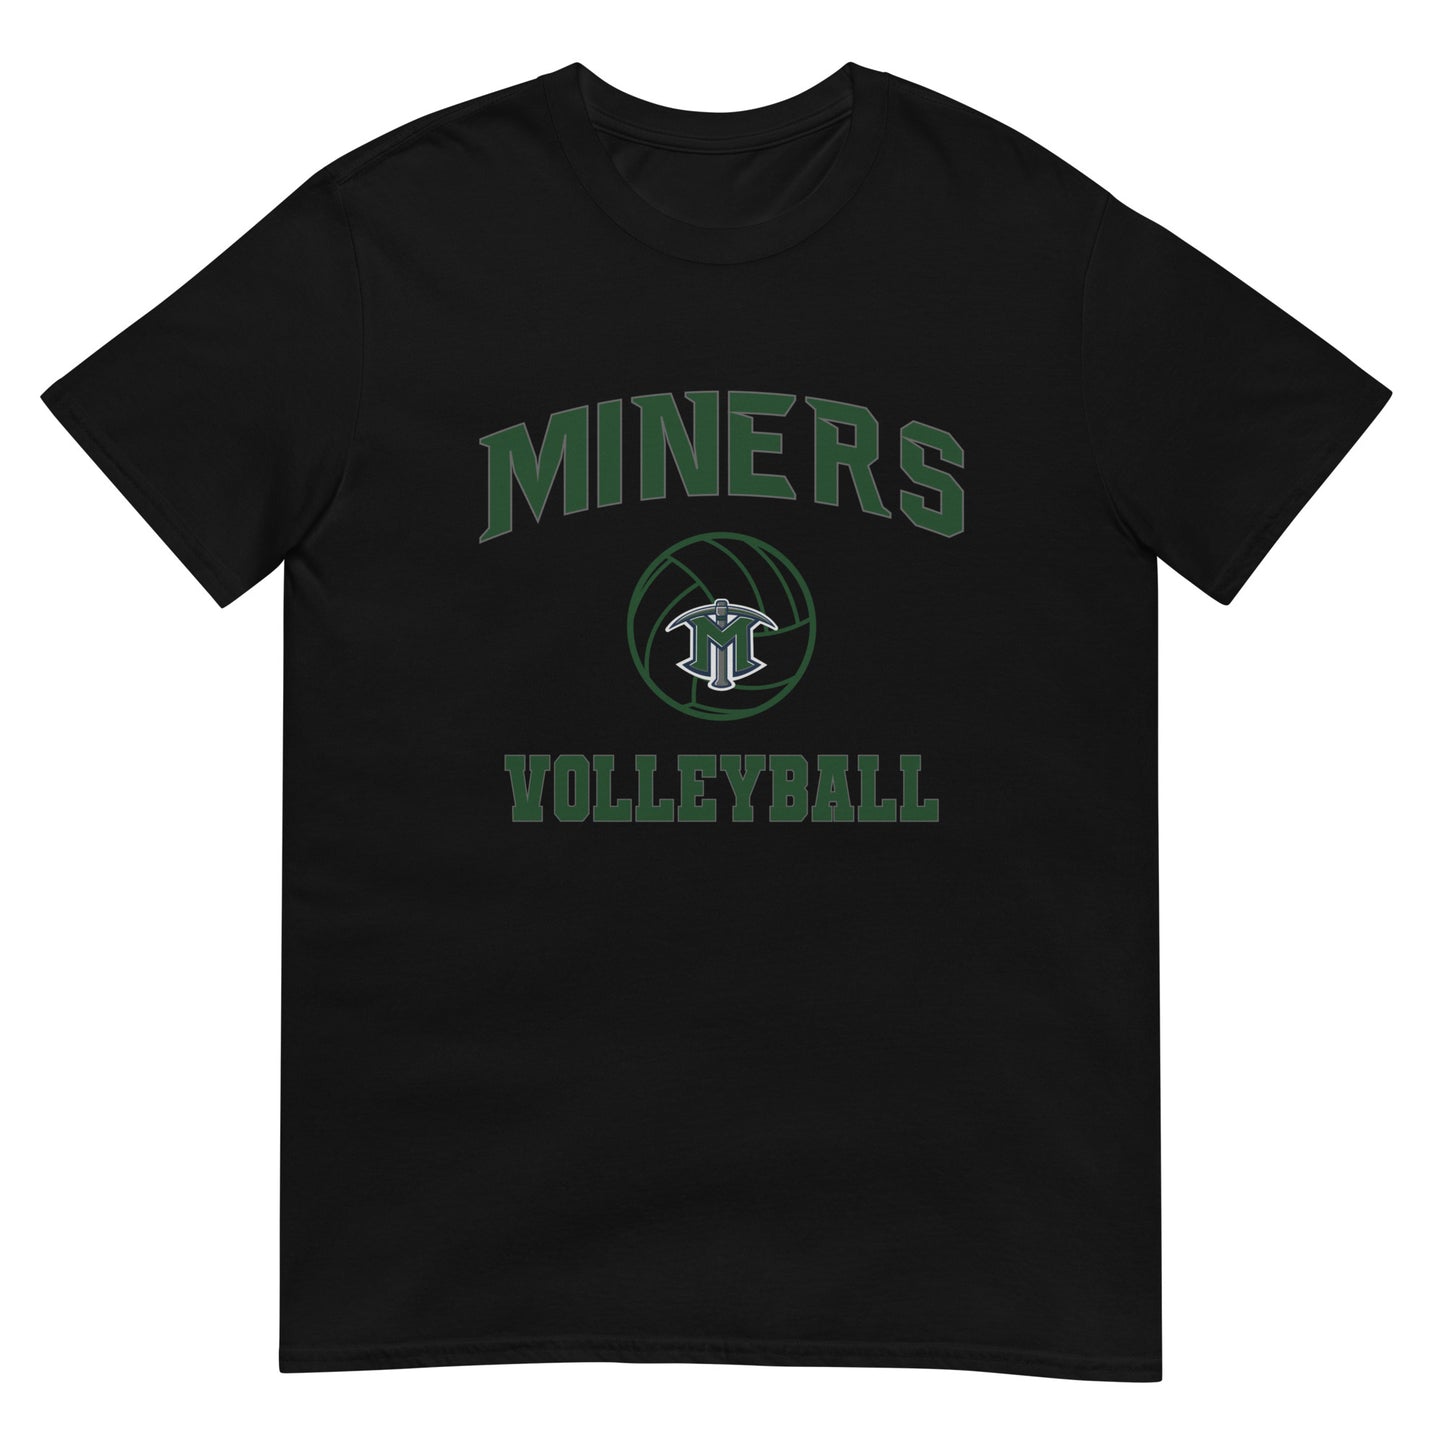 Miners Volleyball Short-Sleeve Unisex T-Shirt